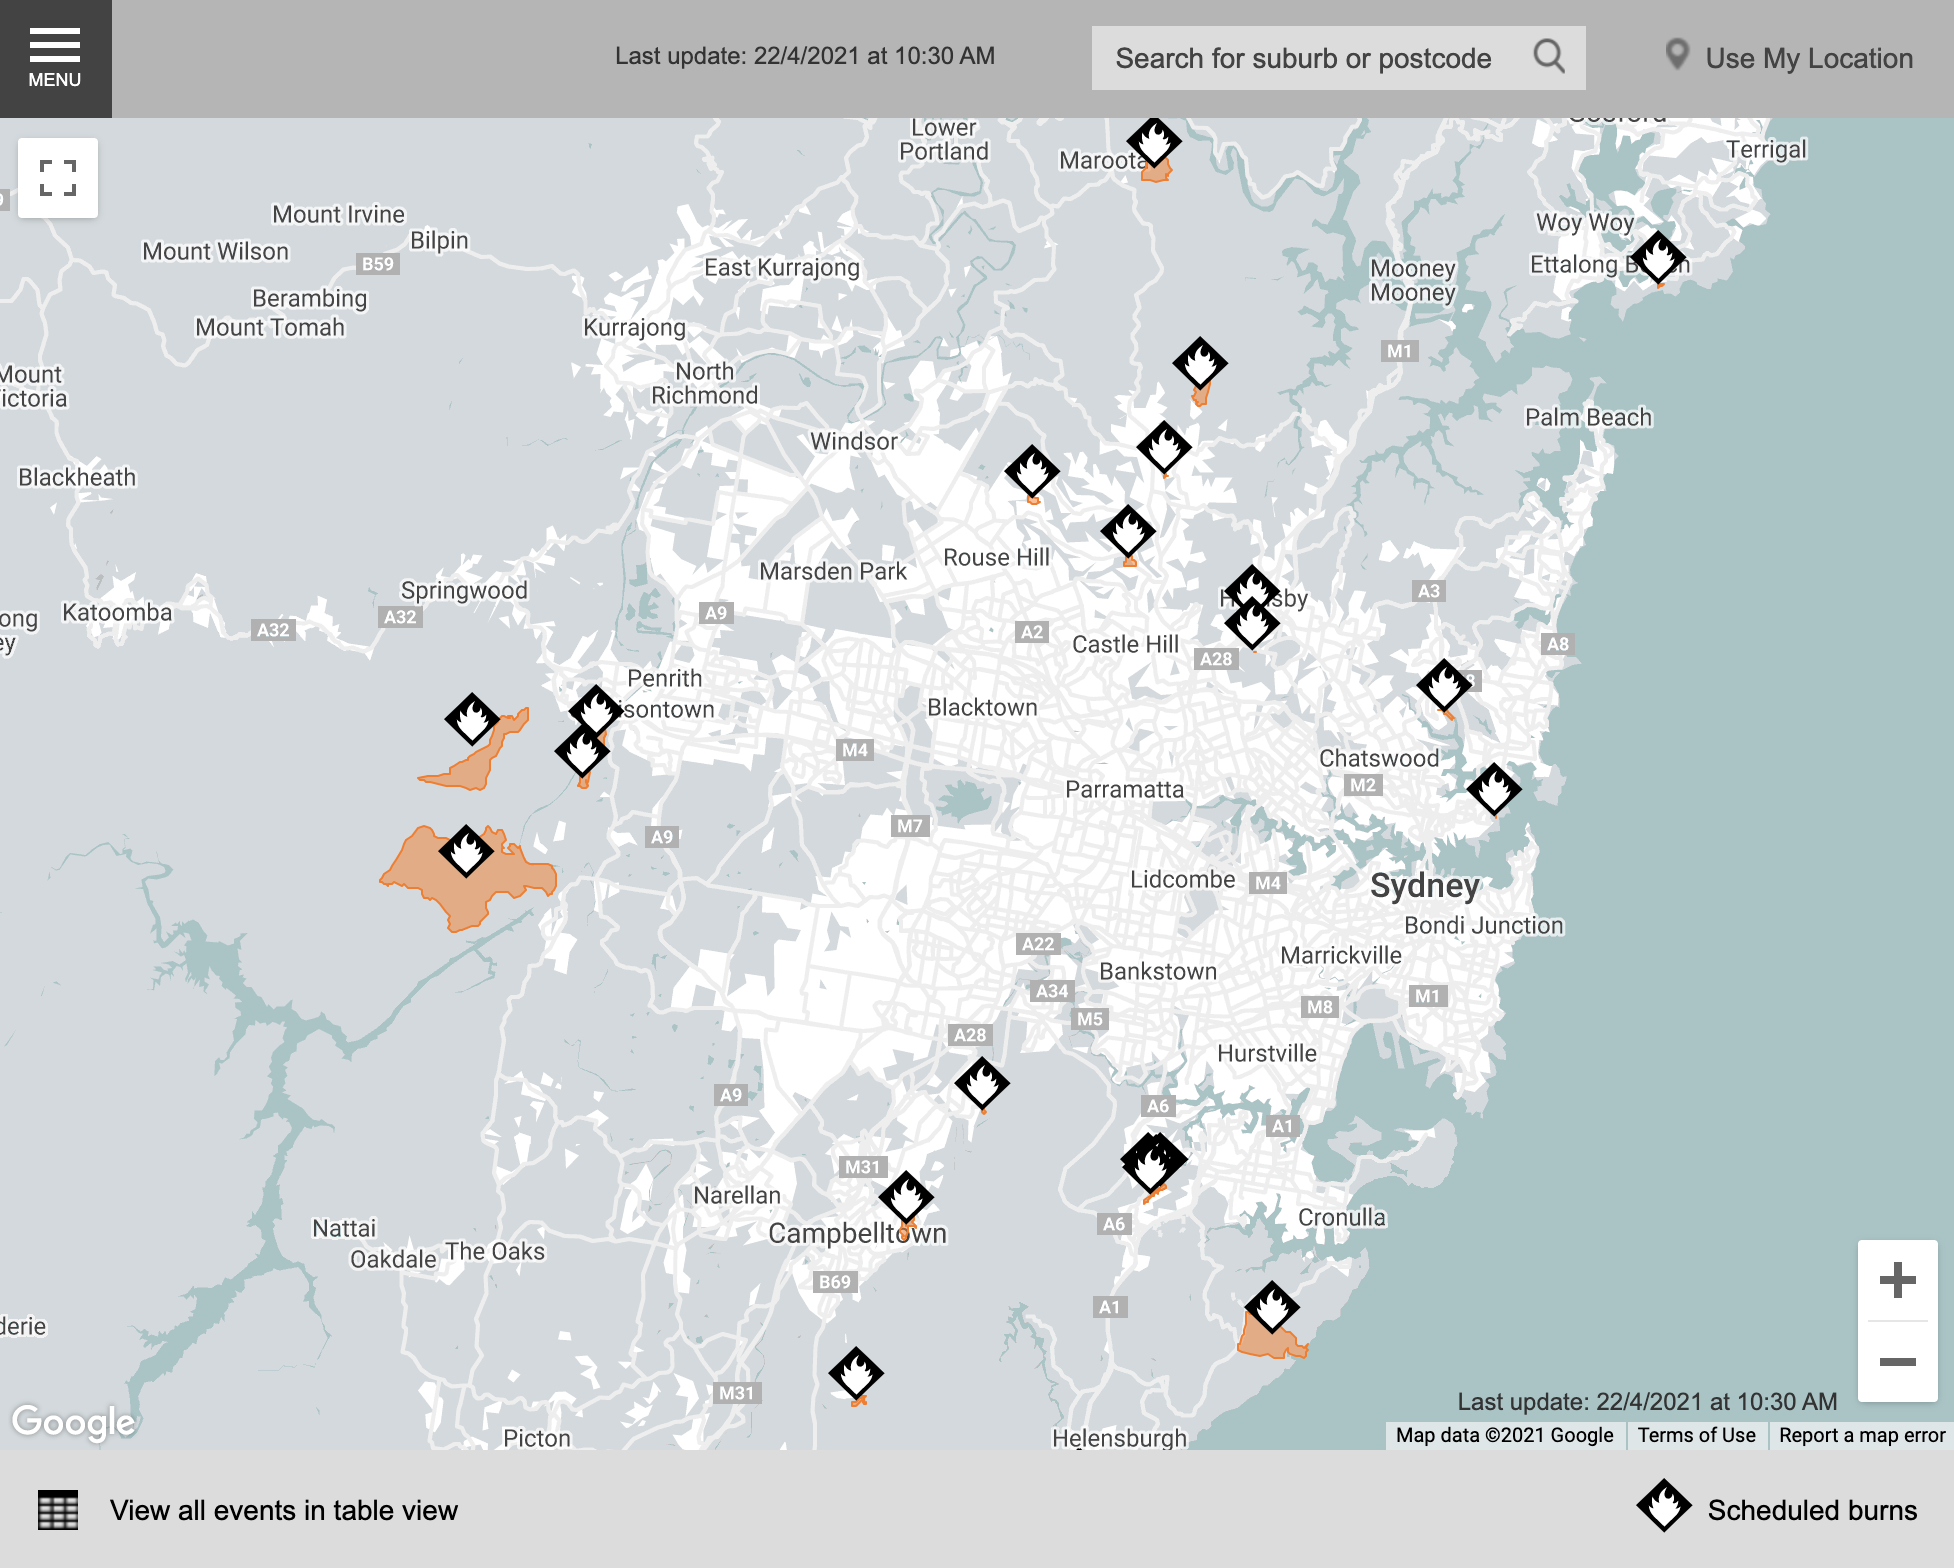 Ring of (planned) fires around Sydney